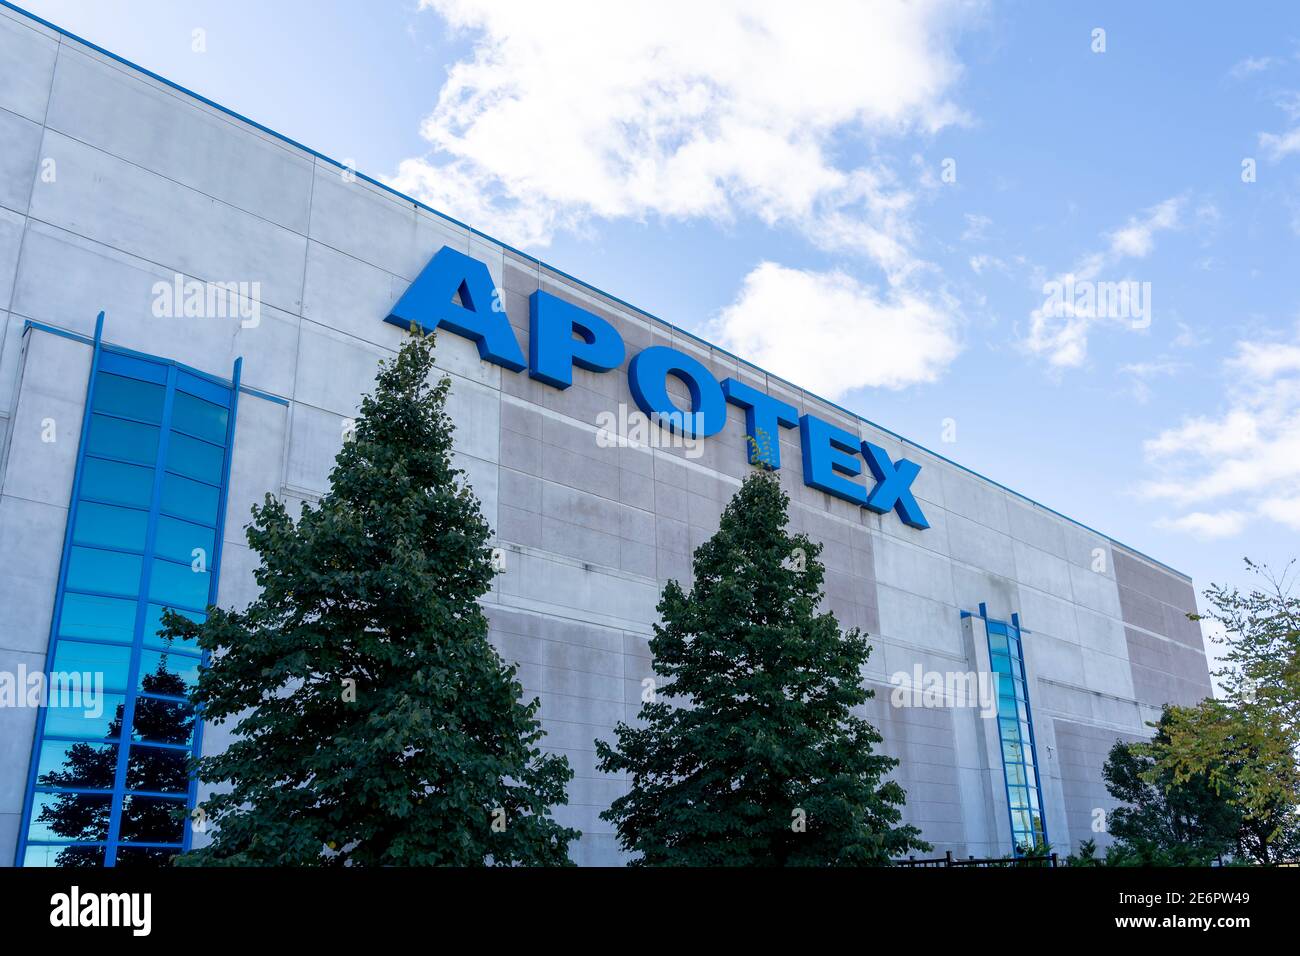 Woodbridge, Ontario, Canada - October 8, 2020: Close up of Apotex sign on the building is seen in Woodbridge, Ontario, Canada. Stock Photo